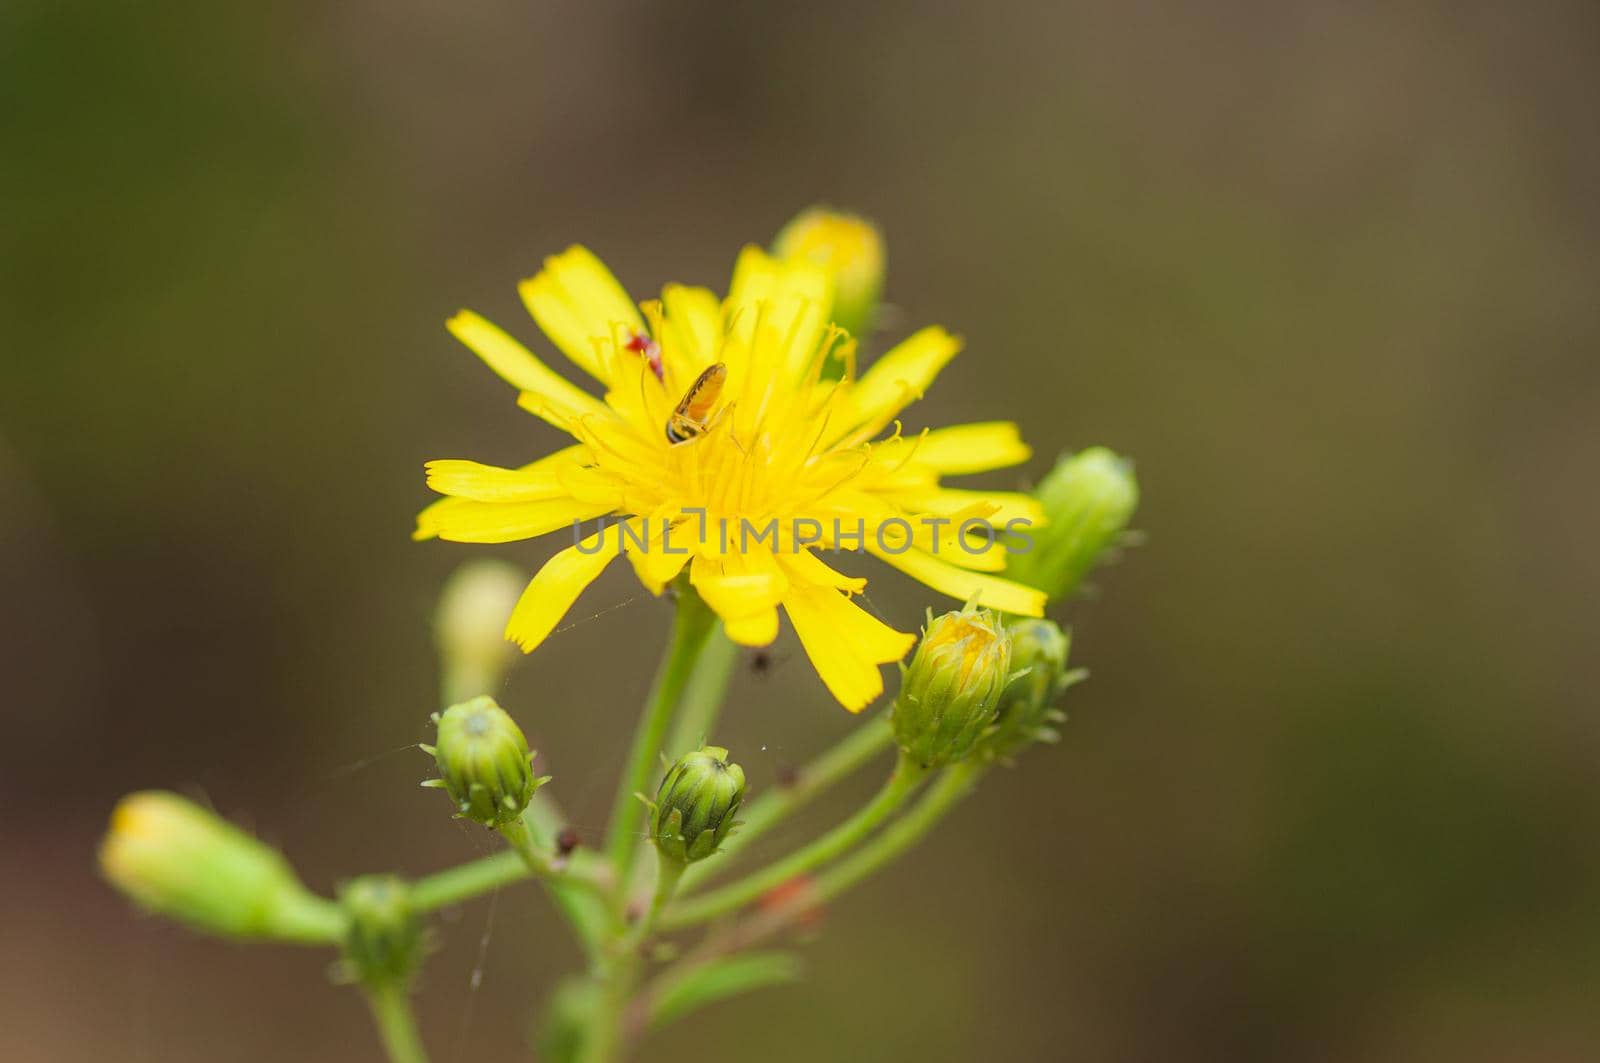 Yellow dandelion-like flowers, yellow wild flower with insect on it by shanserika